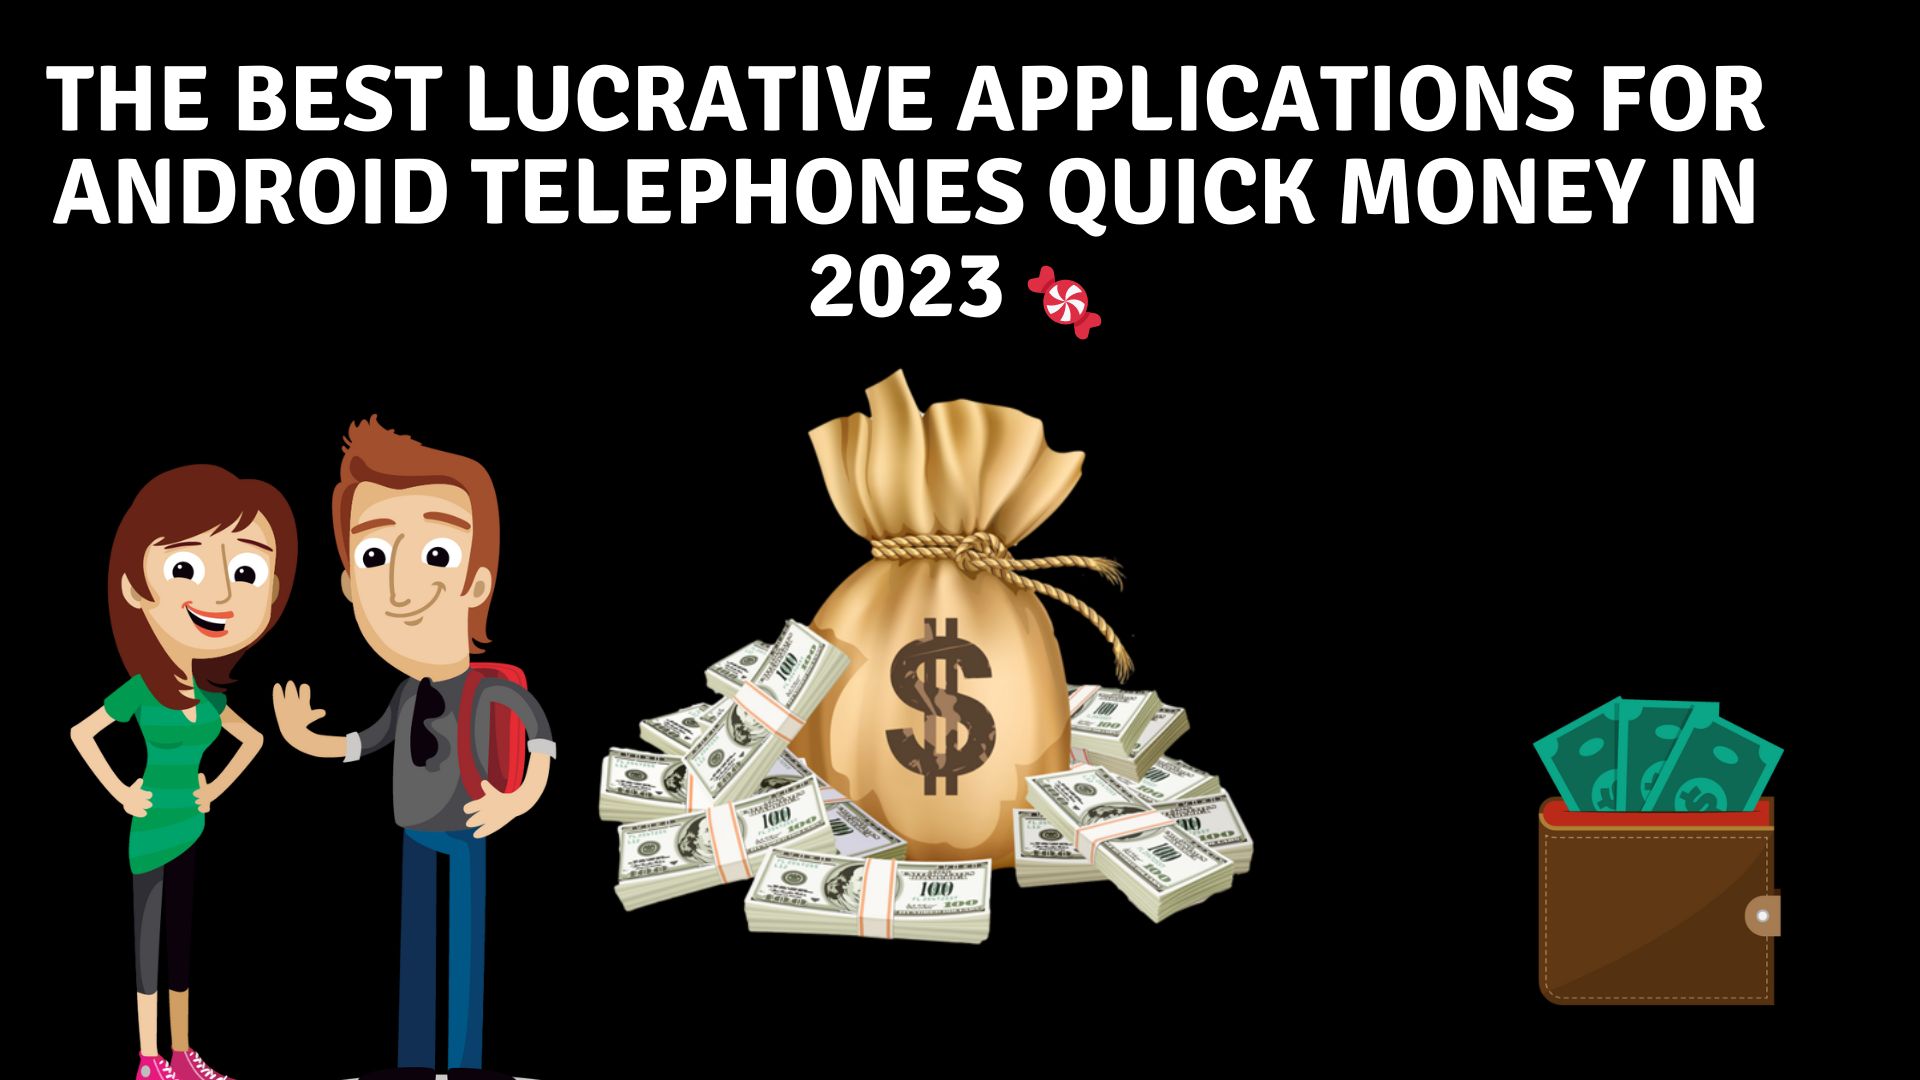 The best lucrative applications for android telephones quick money in 2023